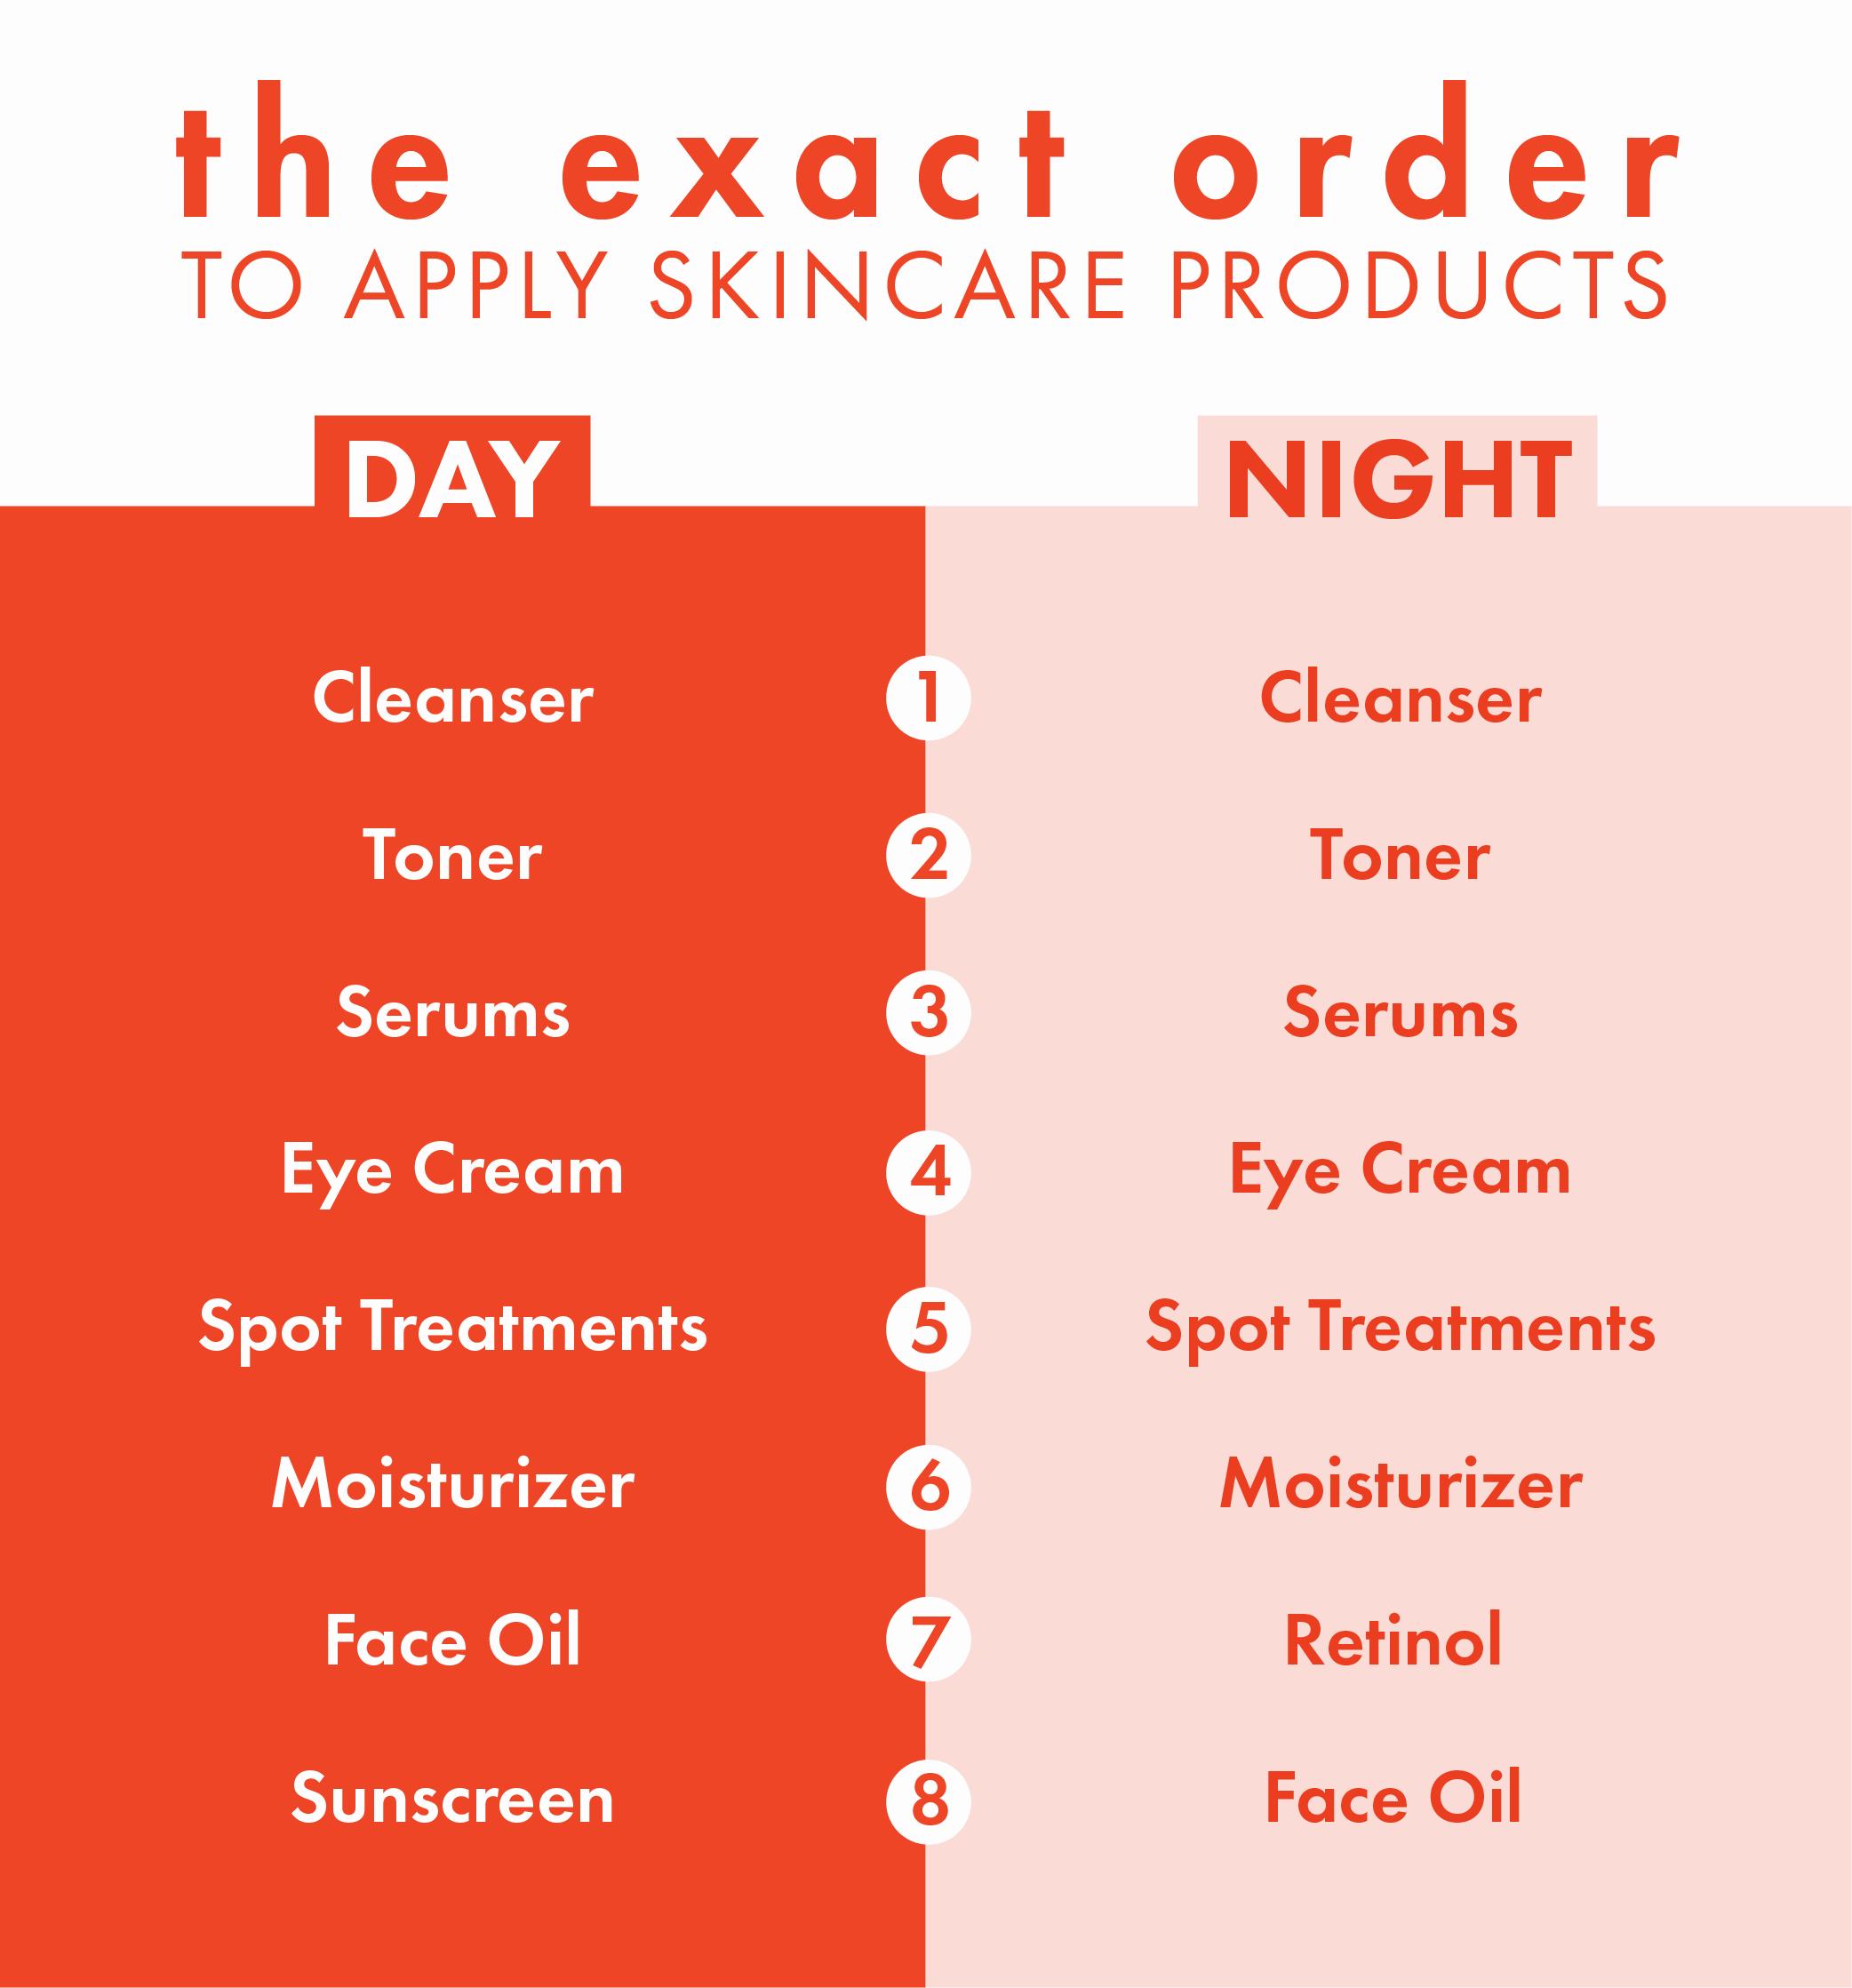 A step-by-step skincare routine for day and night.